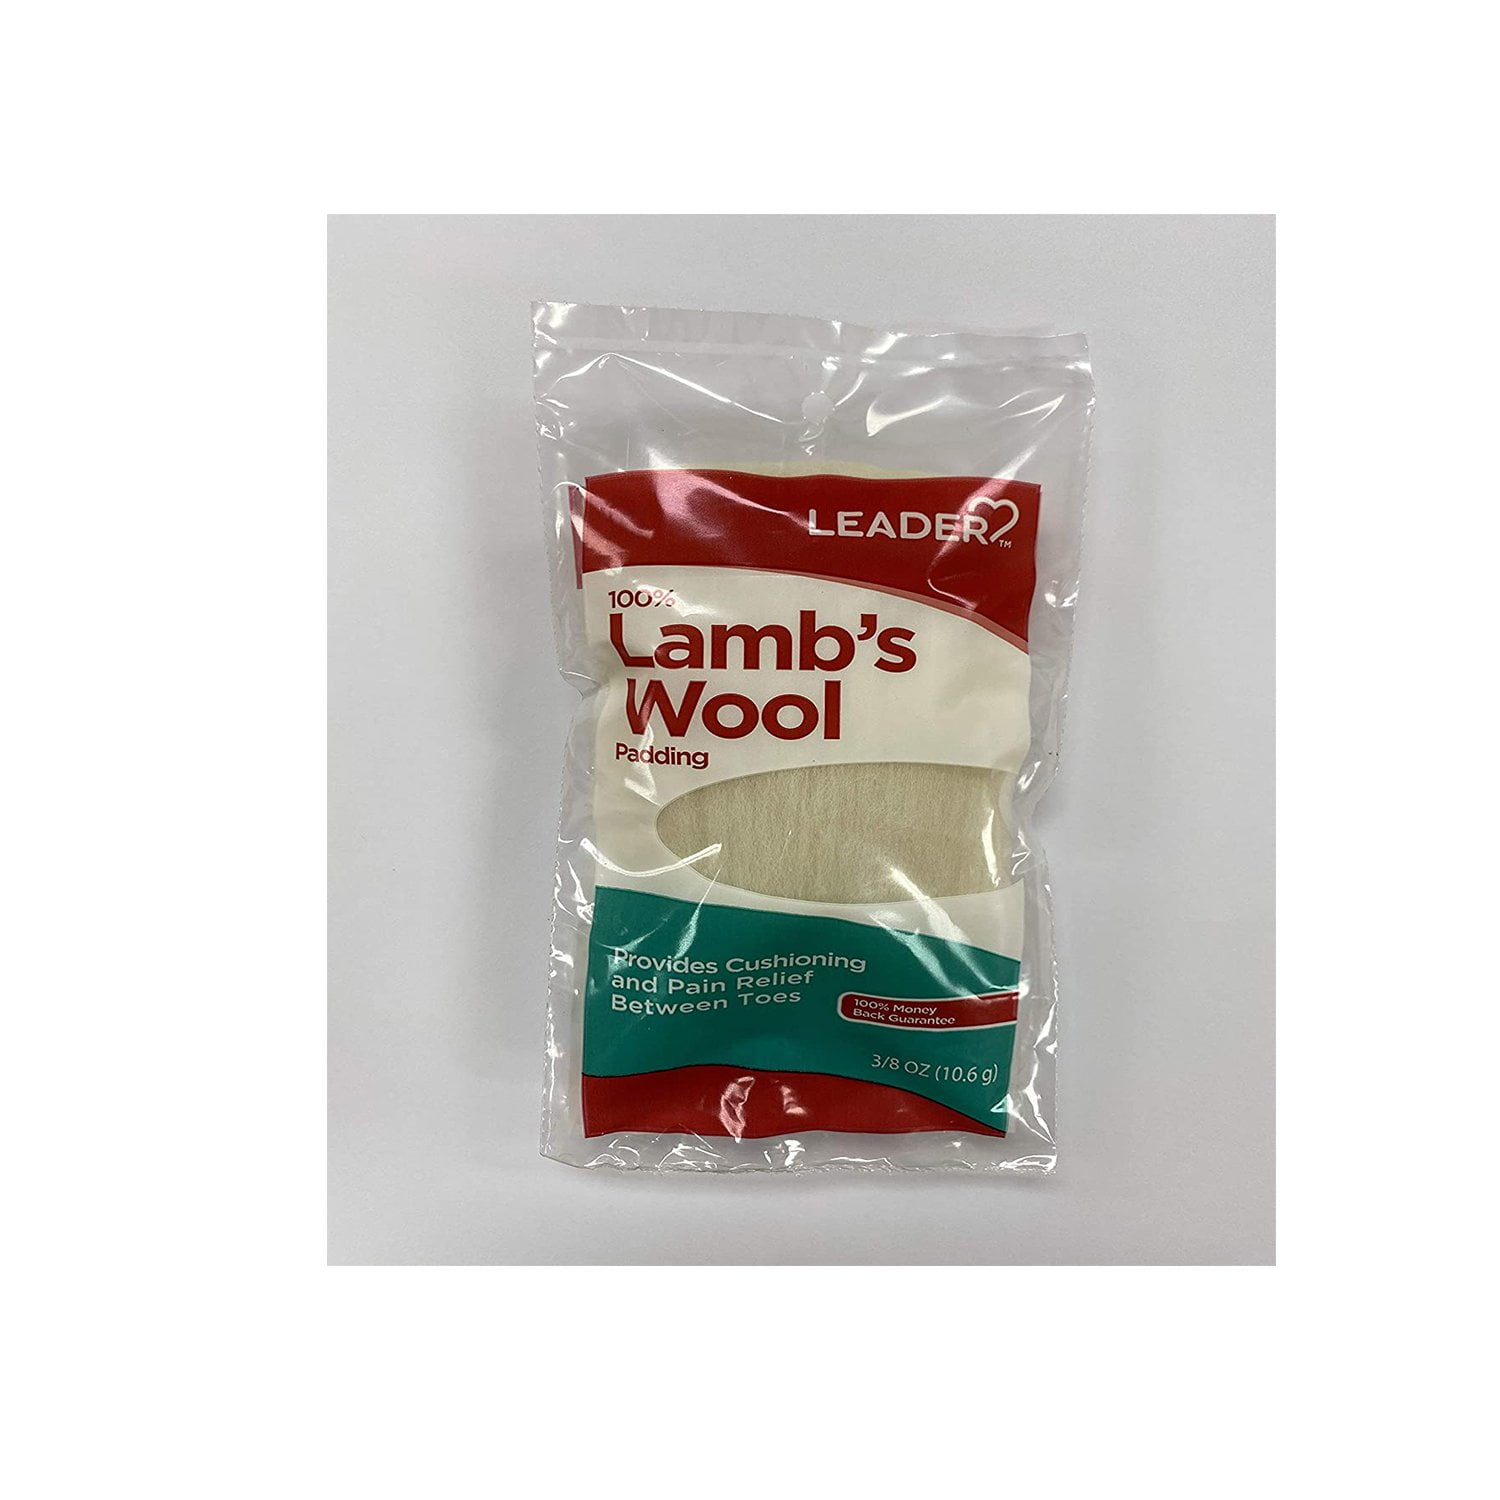 Lambs Wool Padding by Leader 3 Pack 1 